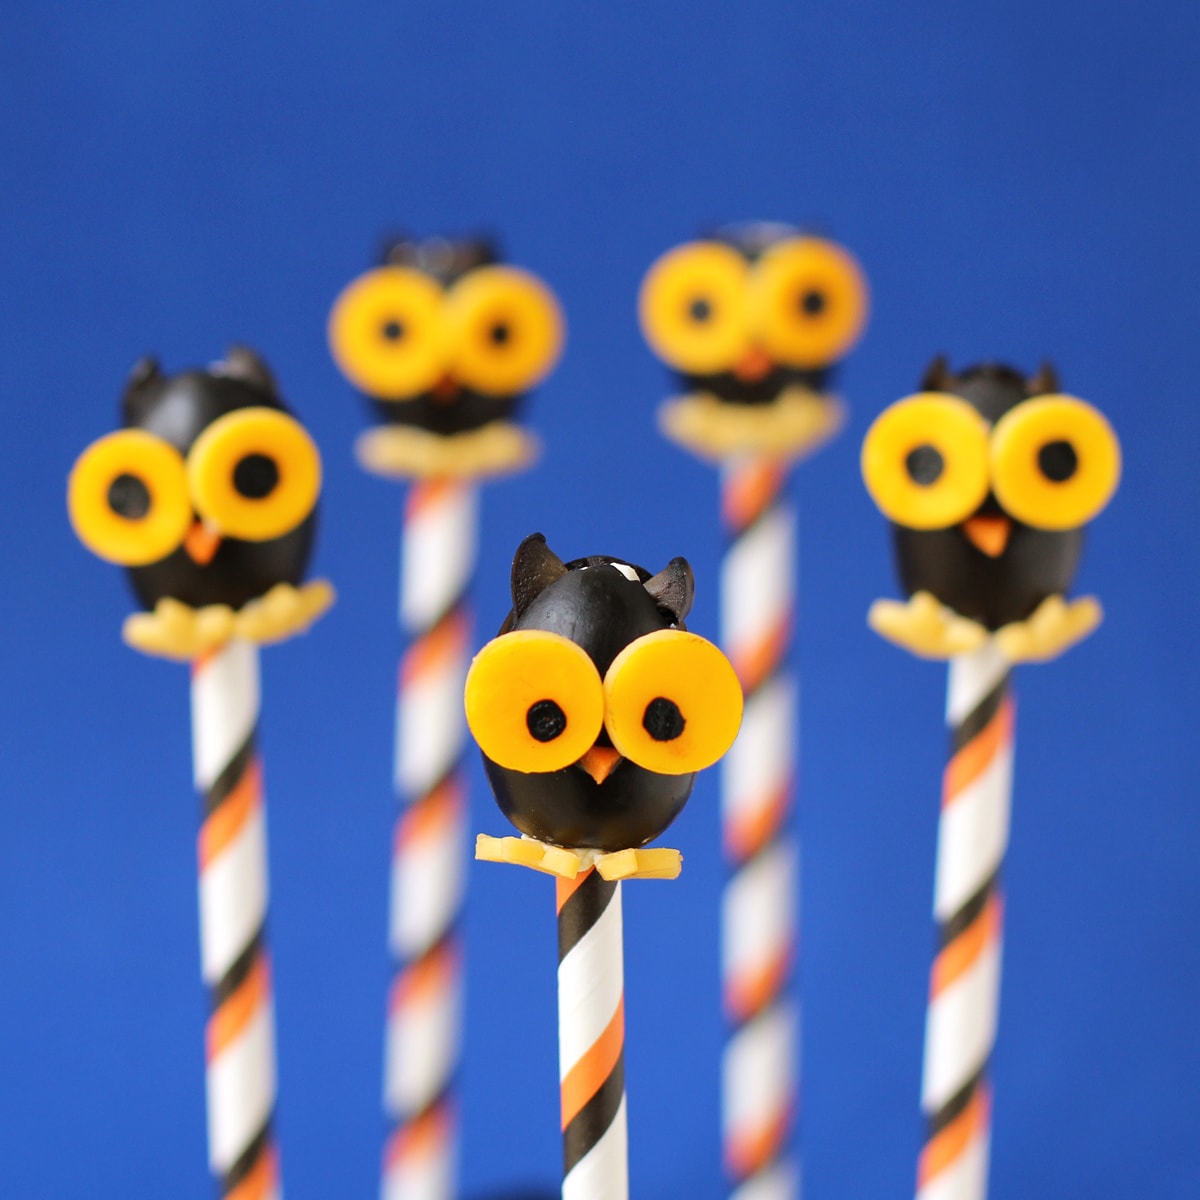 black olive owls on orange, black, and white paper straws, all arranged in front of a blue background.